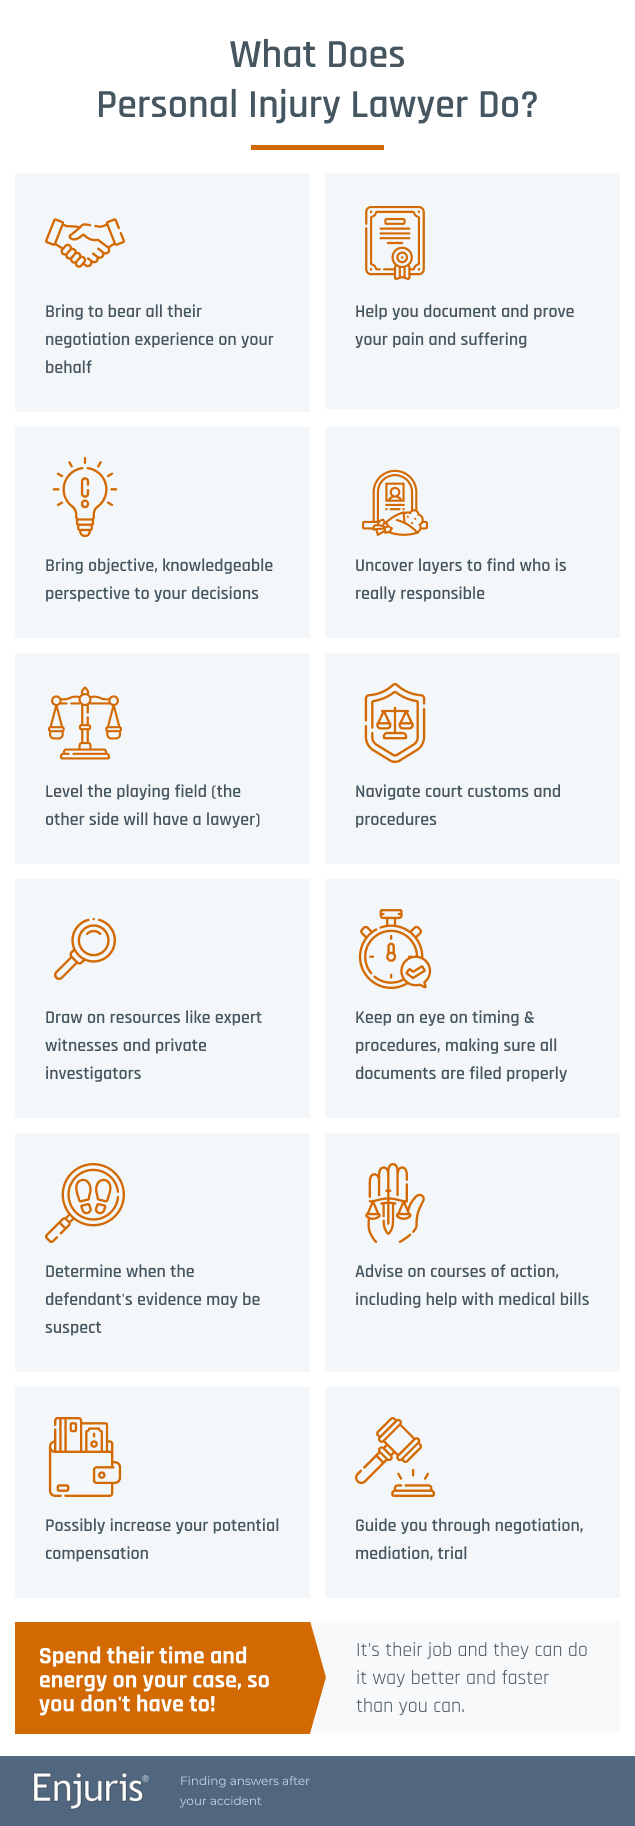 Infographic about what personal injury lawyer does